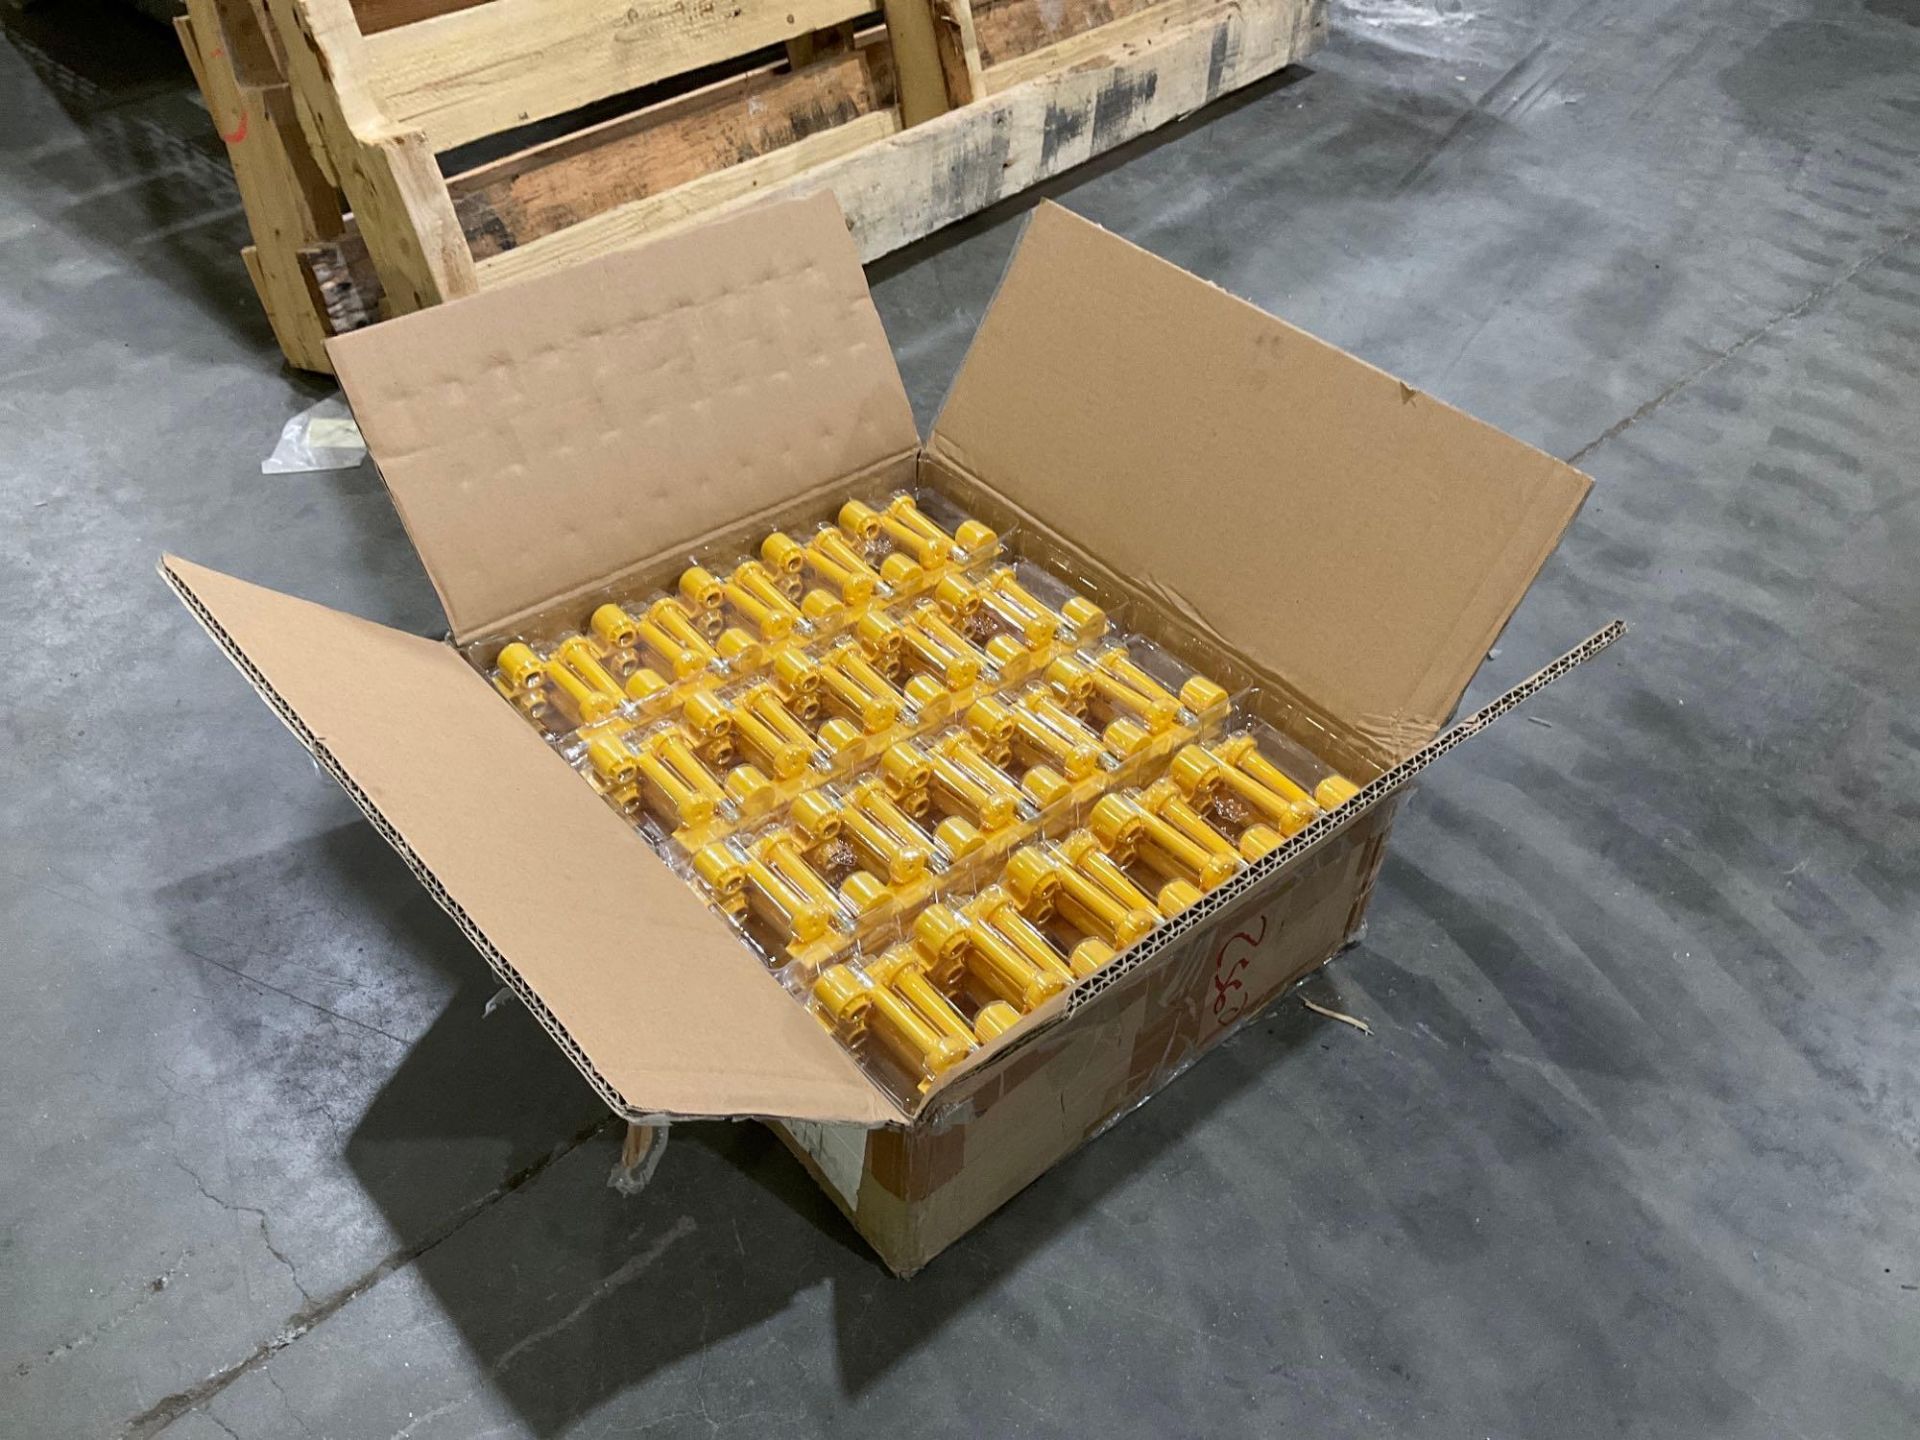 ABI SNAPTRACKER LASER MARKED YELLOW BOLT SEALS , APPROX 200 IN BOX - Image 2 of 4